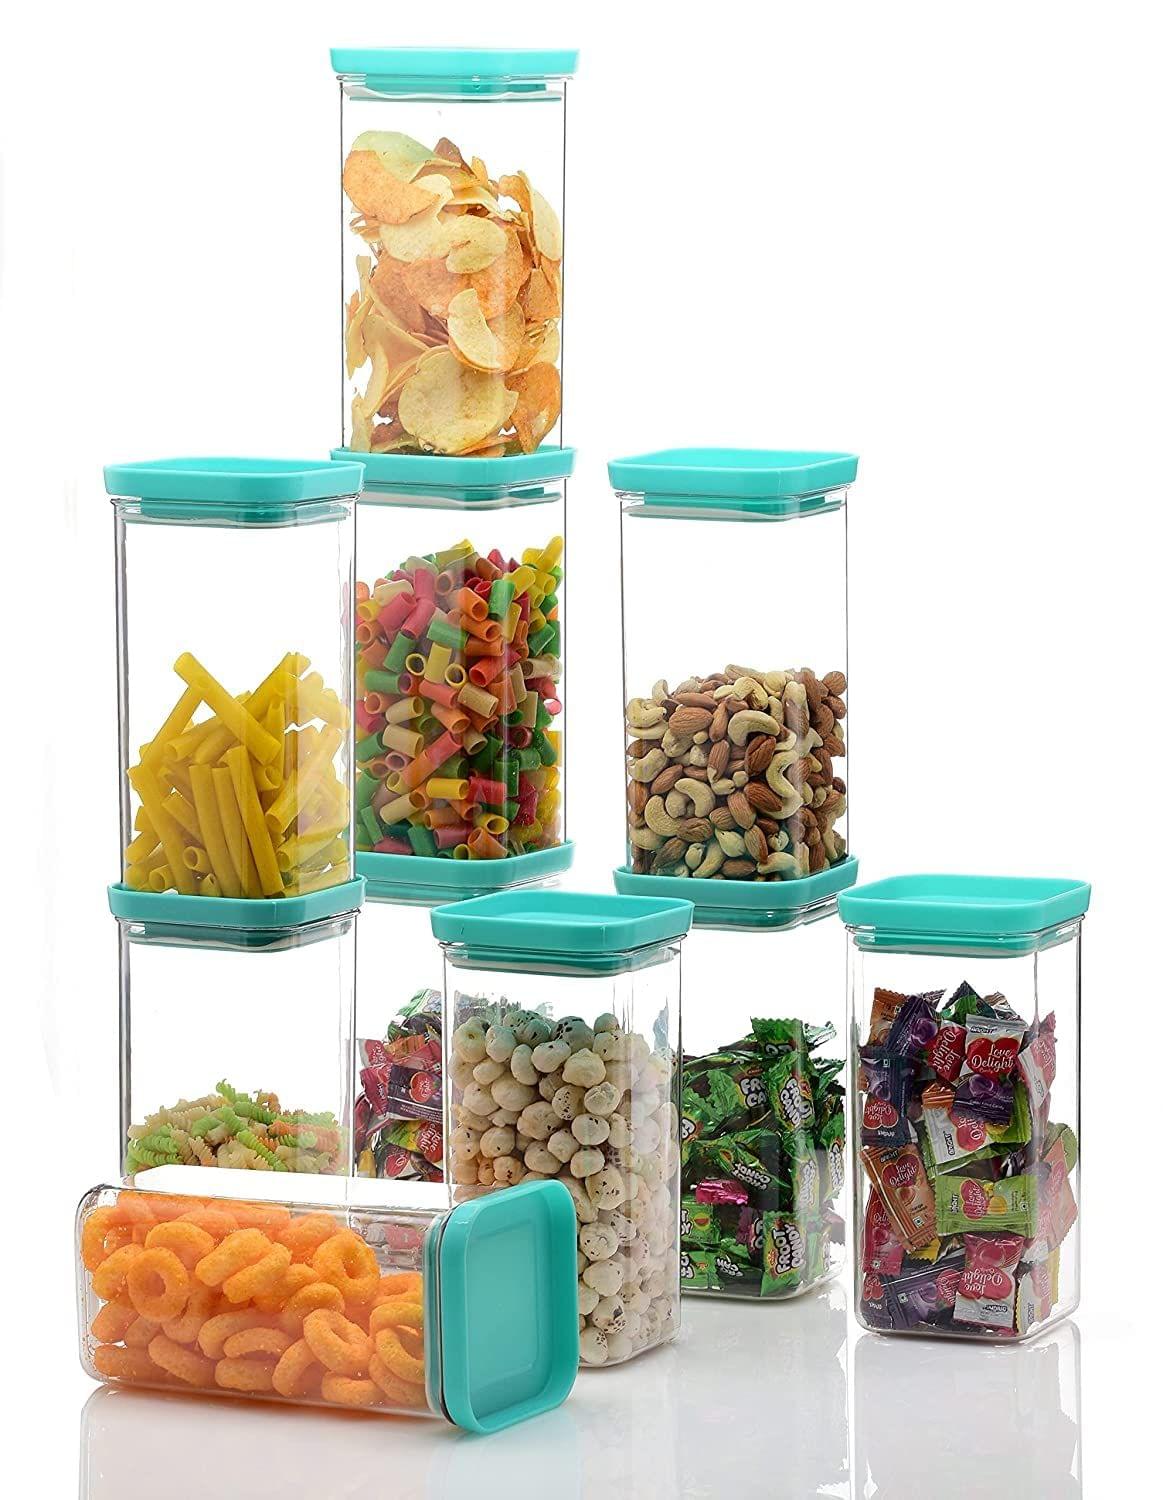 HASHONE Plastic Easy Flow Cereal Dispenser Storage Box Jar Food Rice Pasta Pulses Square Containers with Lid, Idle for Kitchen 1500 ml Push Up Container Pack Of 6, Sea Green